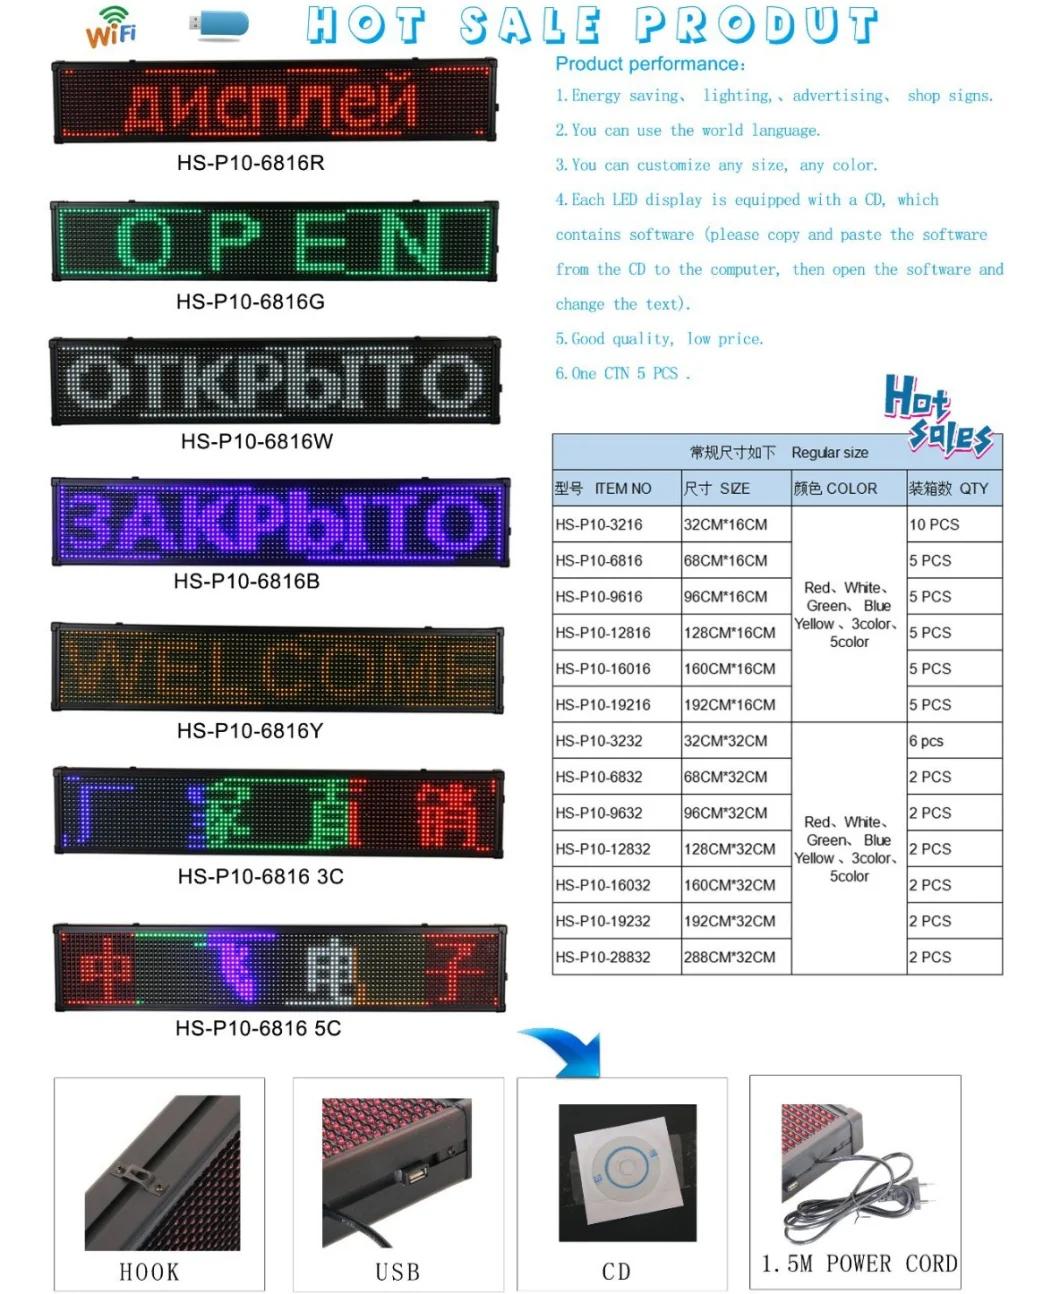 Wall Billboard Screen Lightweight Ultra-Thin LED Display Can Be Programmed by Mobile Phone